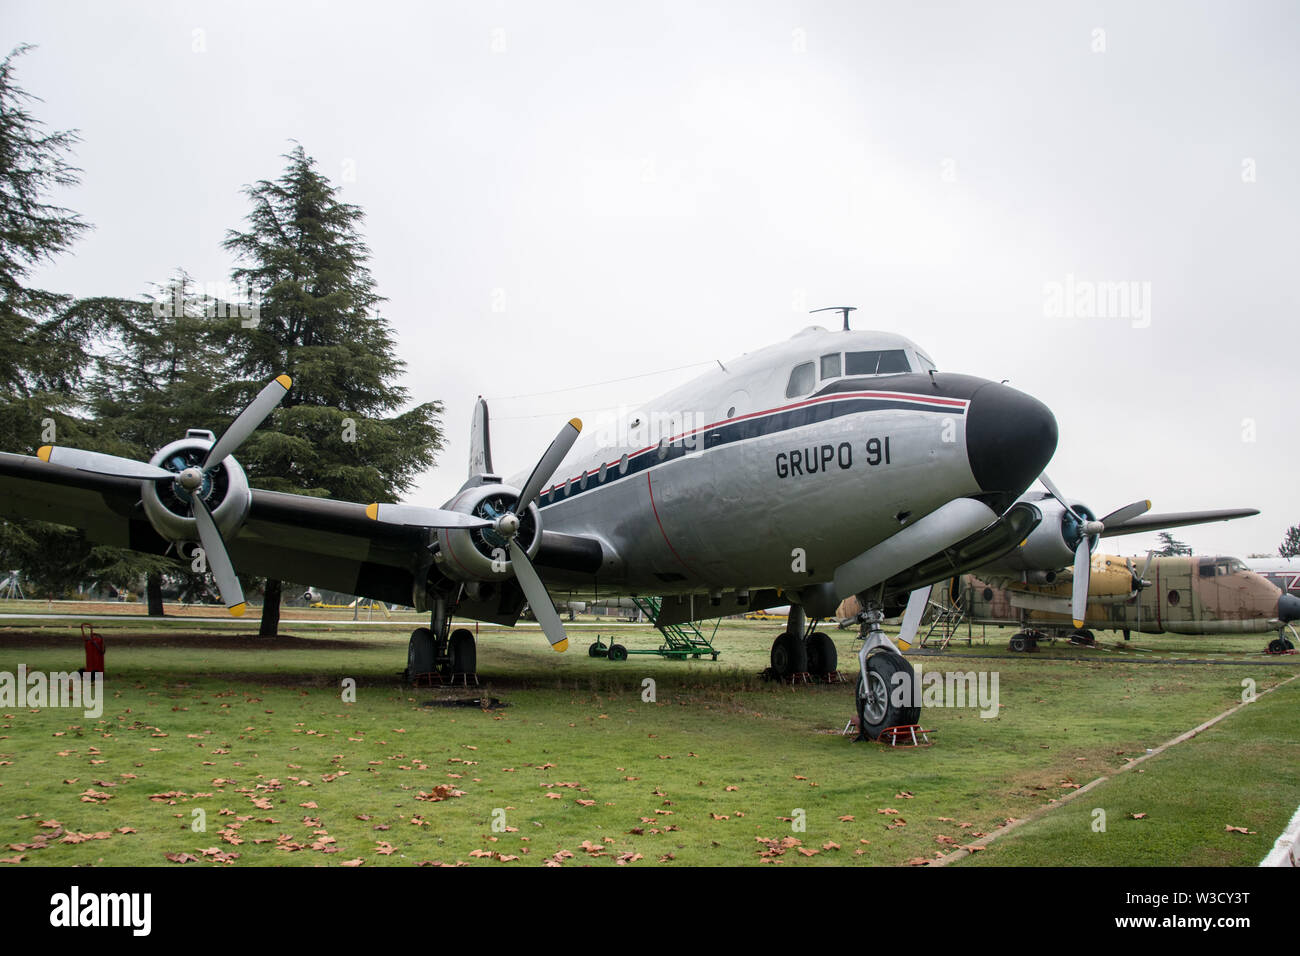 A Spanish Air Force C-54 Skymaster at the Museo de Aire Madrid, Spain Stock Photo